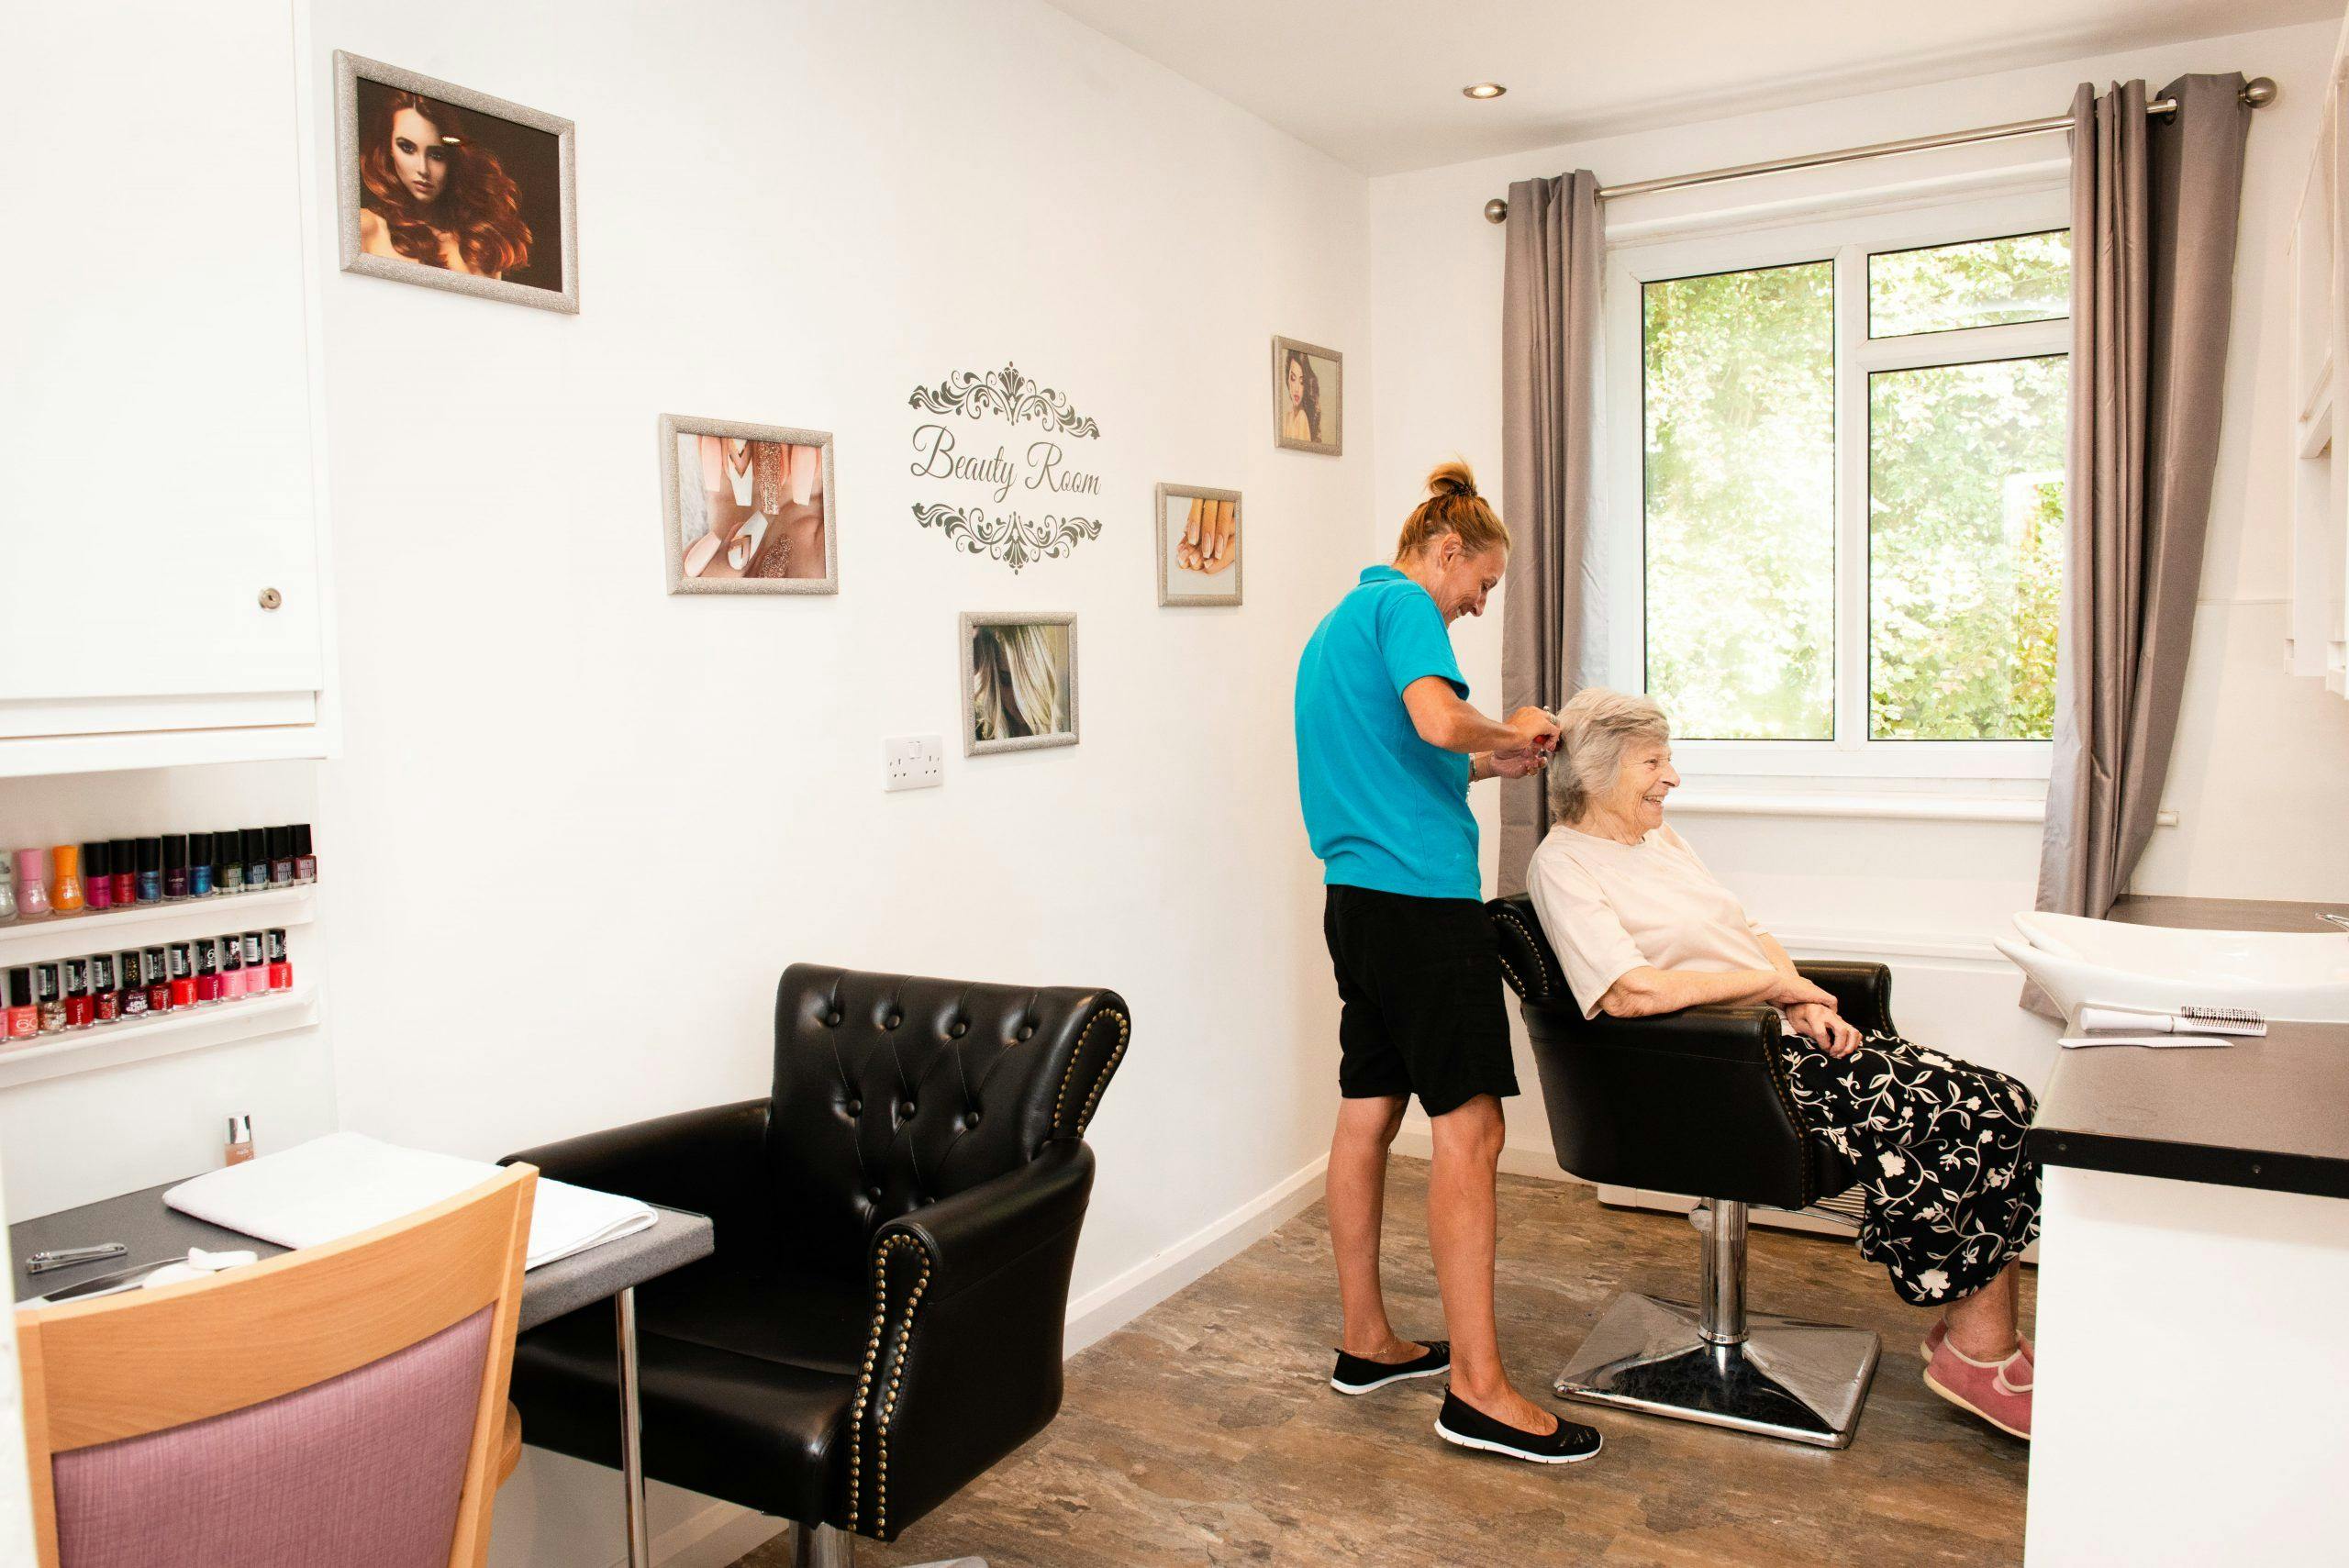 Hair and Beauty Salon of West Hallam Care Home in Ilkeston, Derbyshire